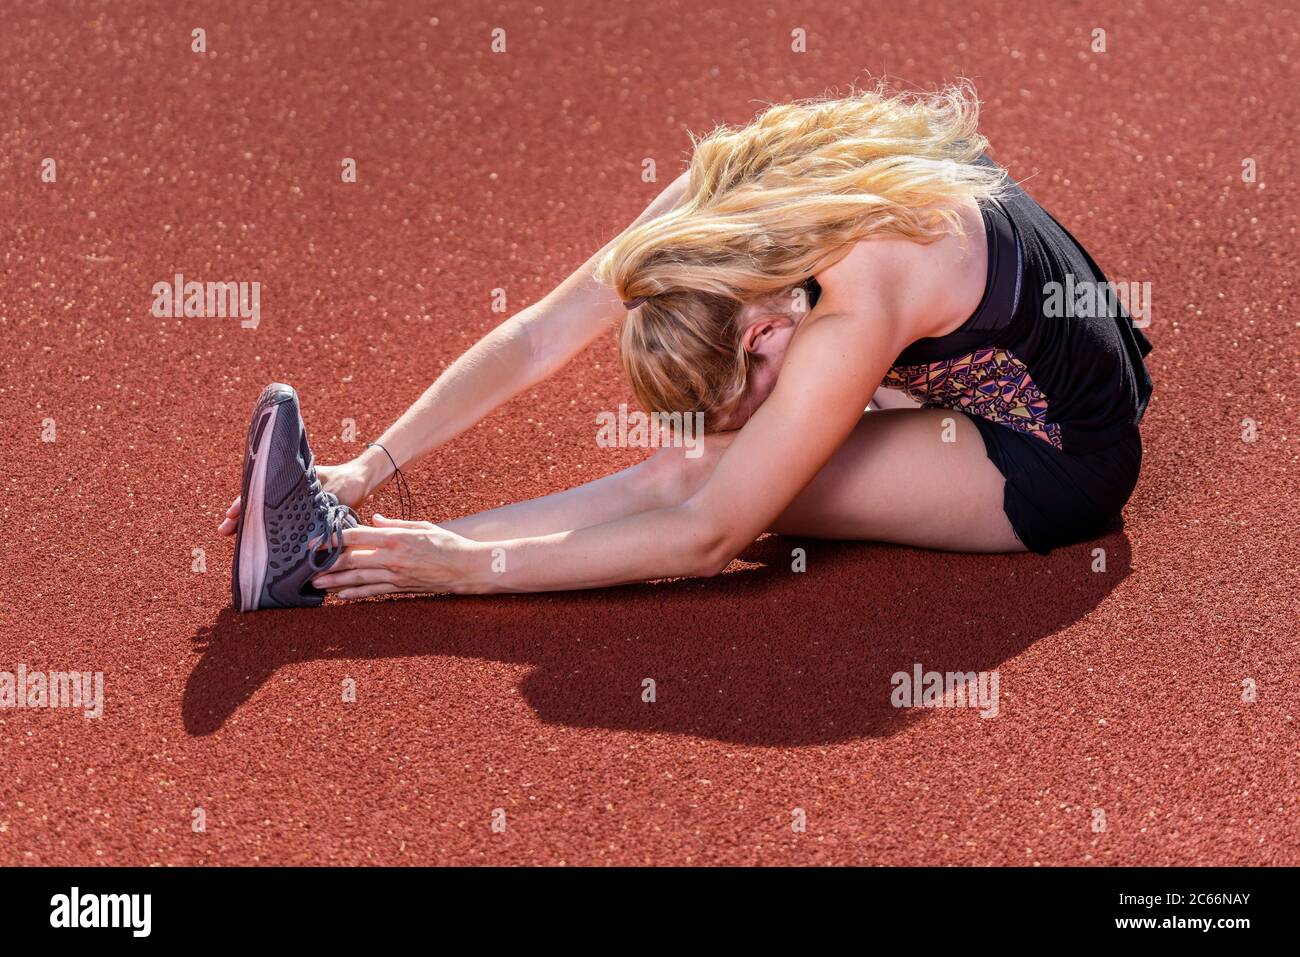 woman, 21 years old, track and field, gymnastics Stock Photo